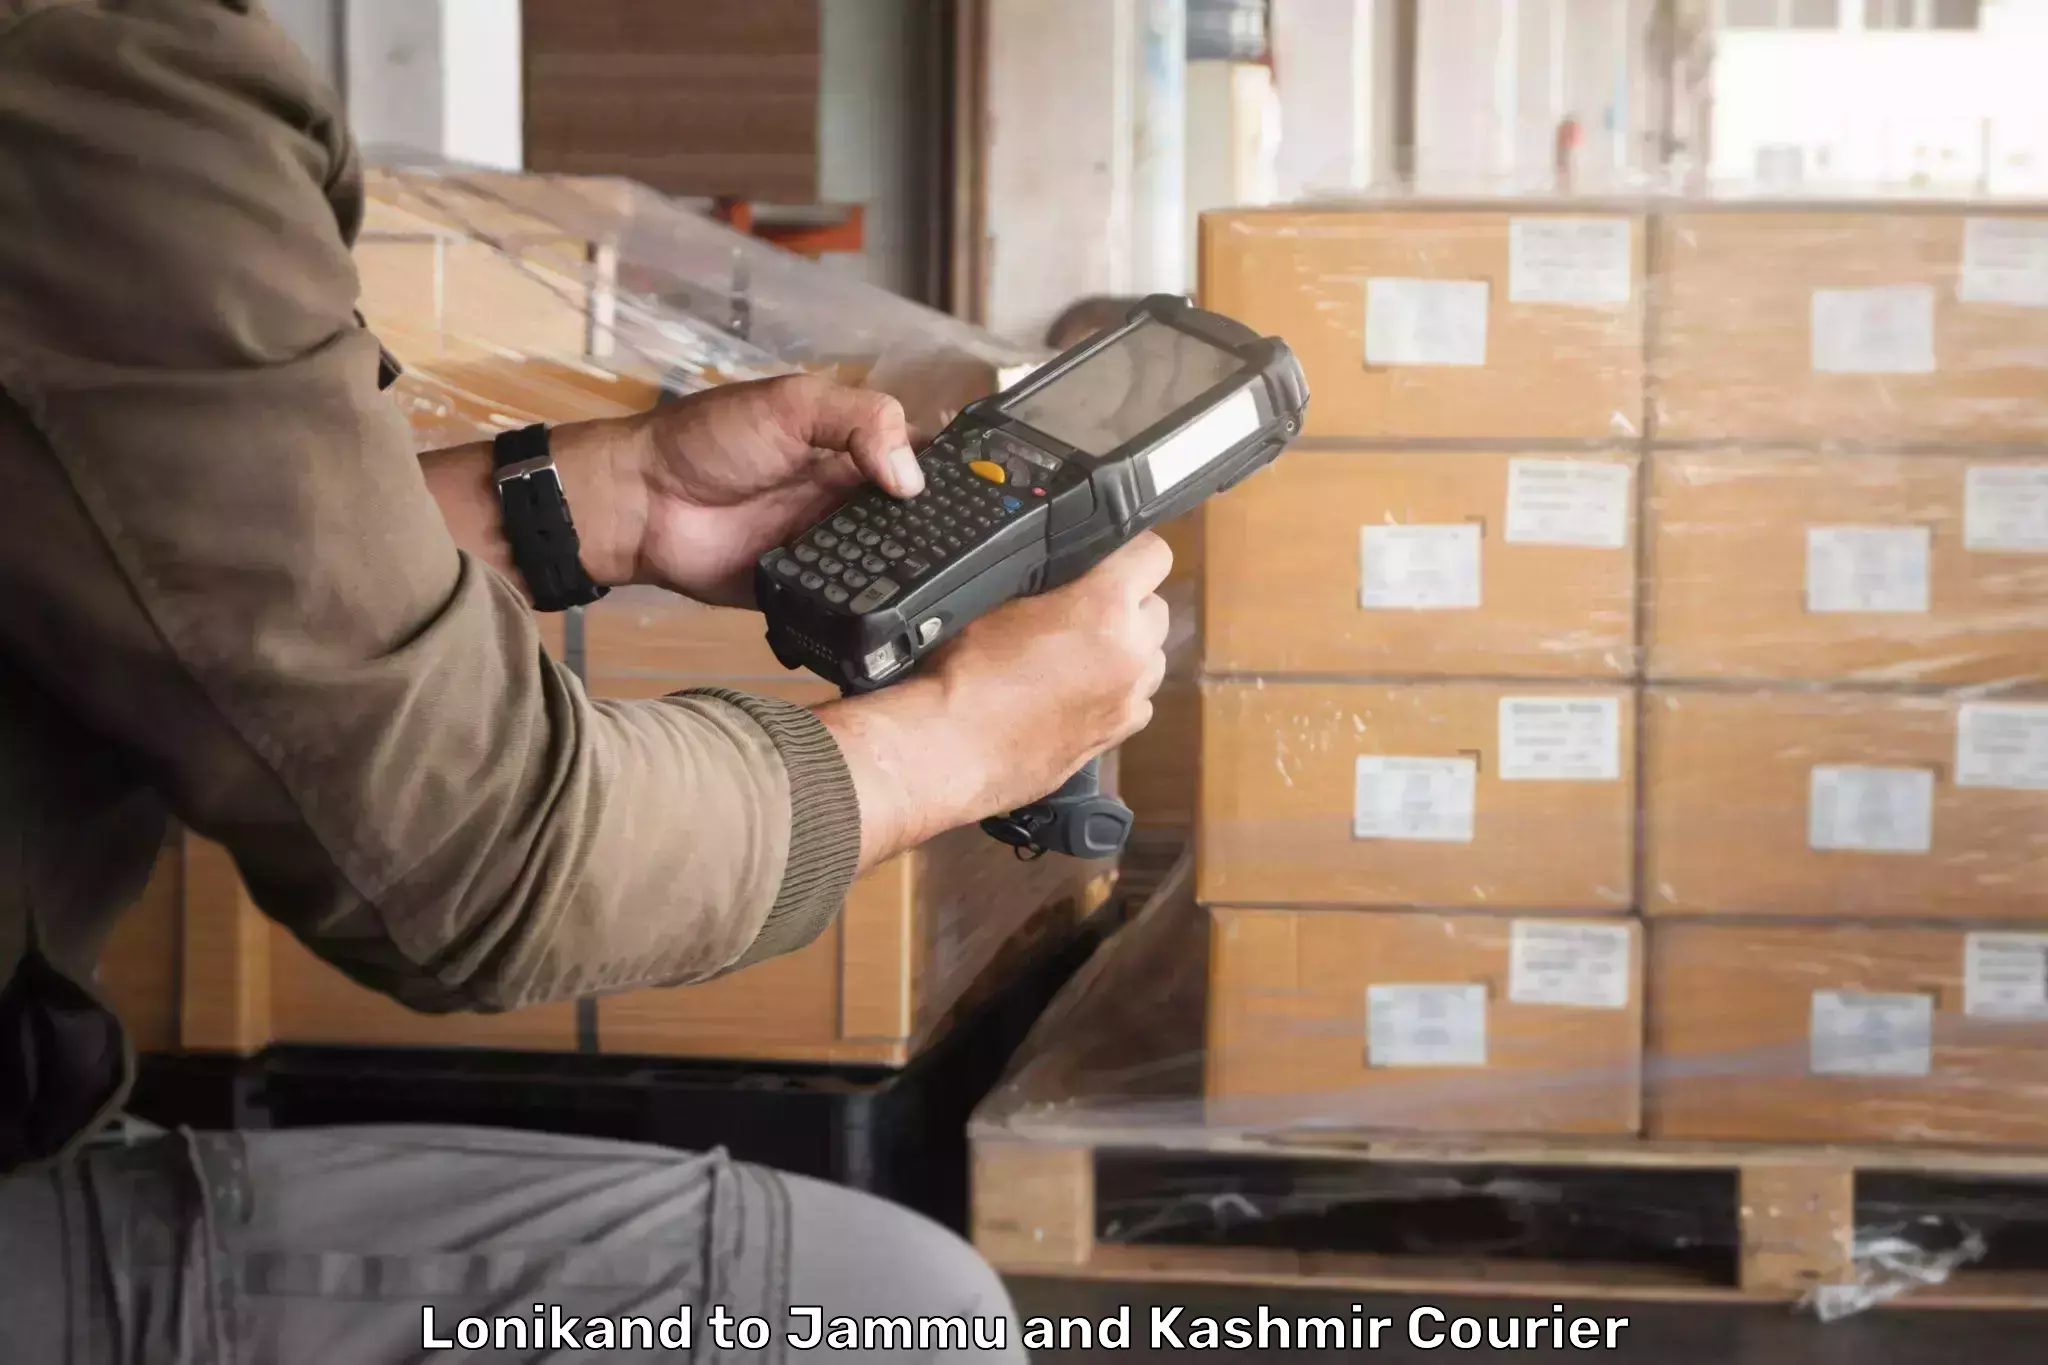 Global courier networks Lonikand to Bhaderwah